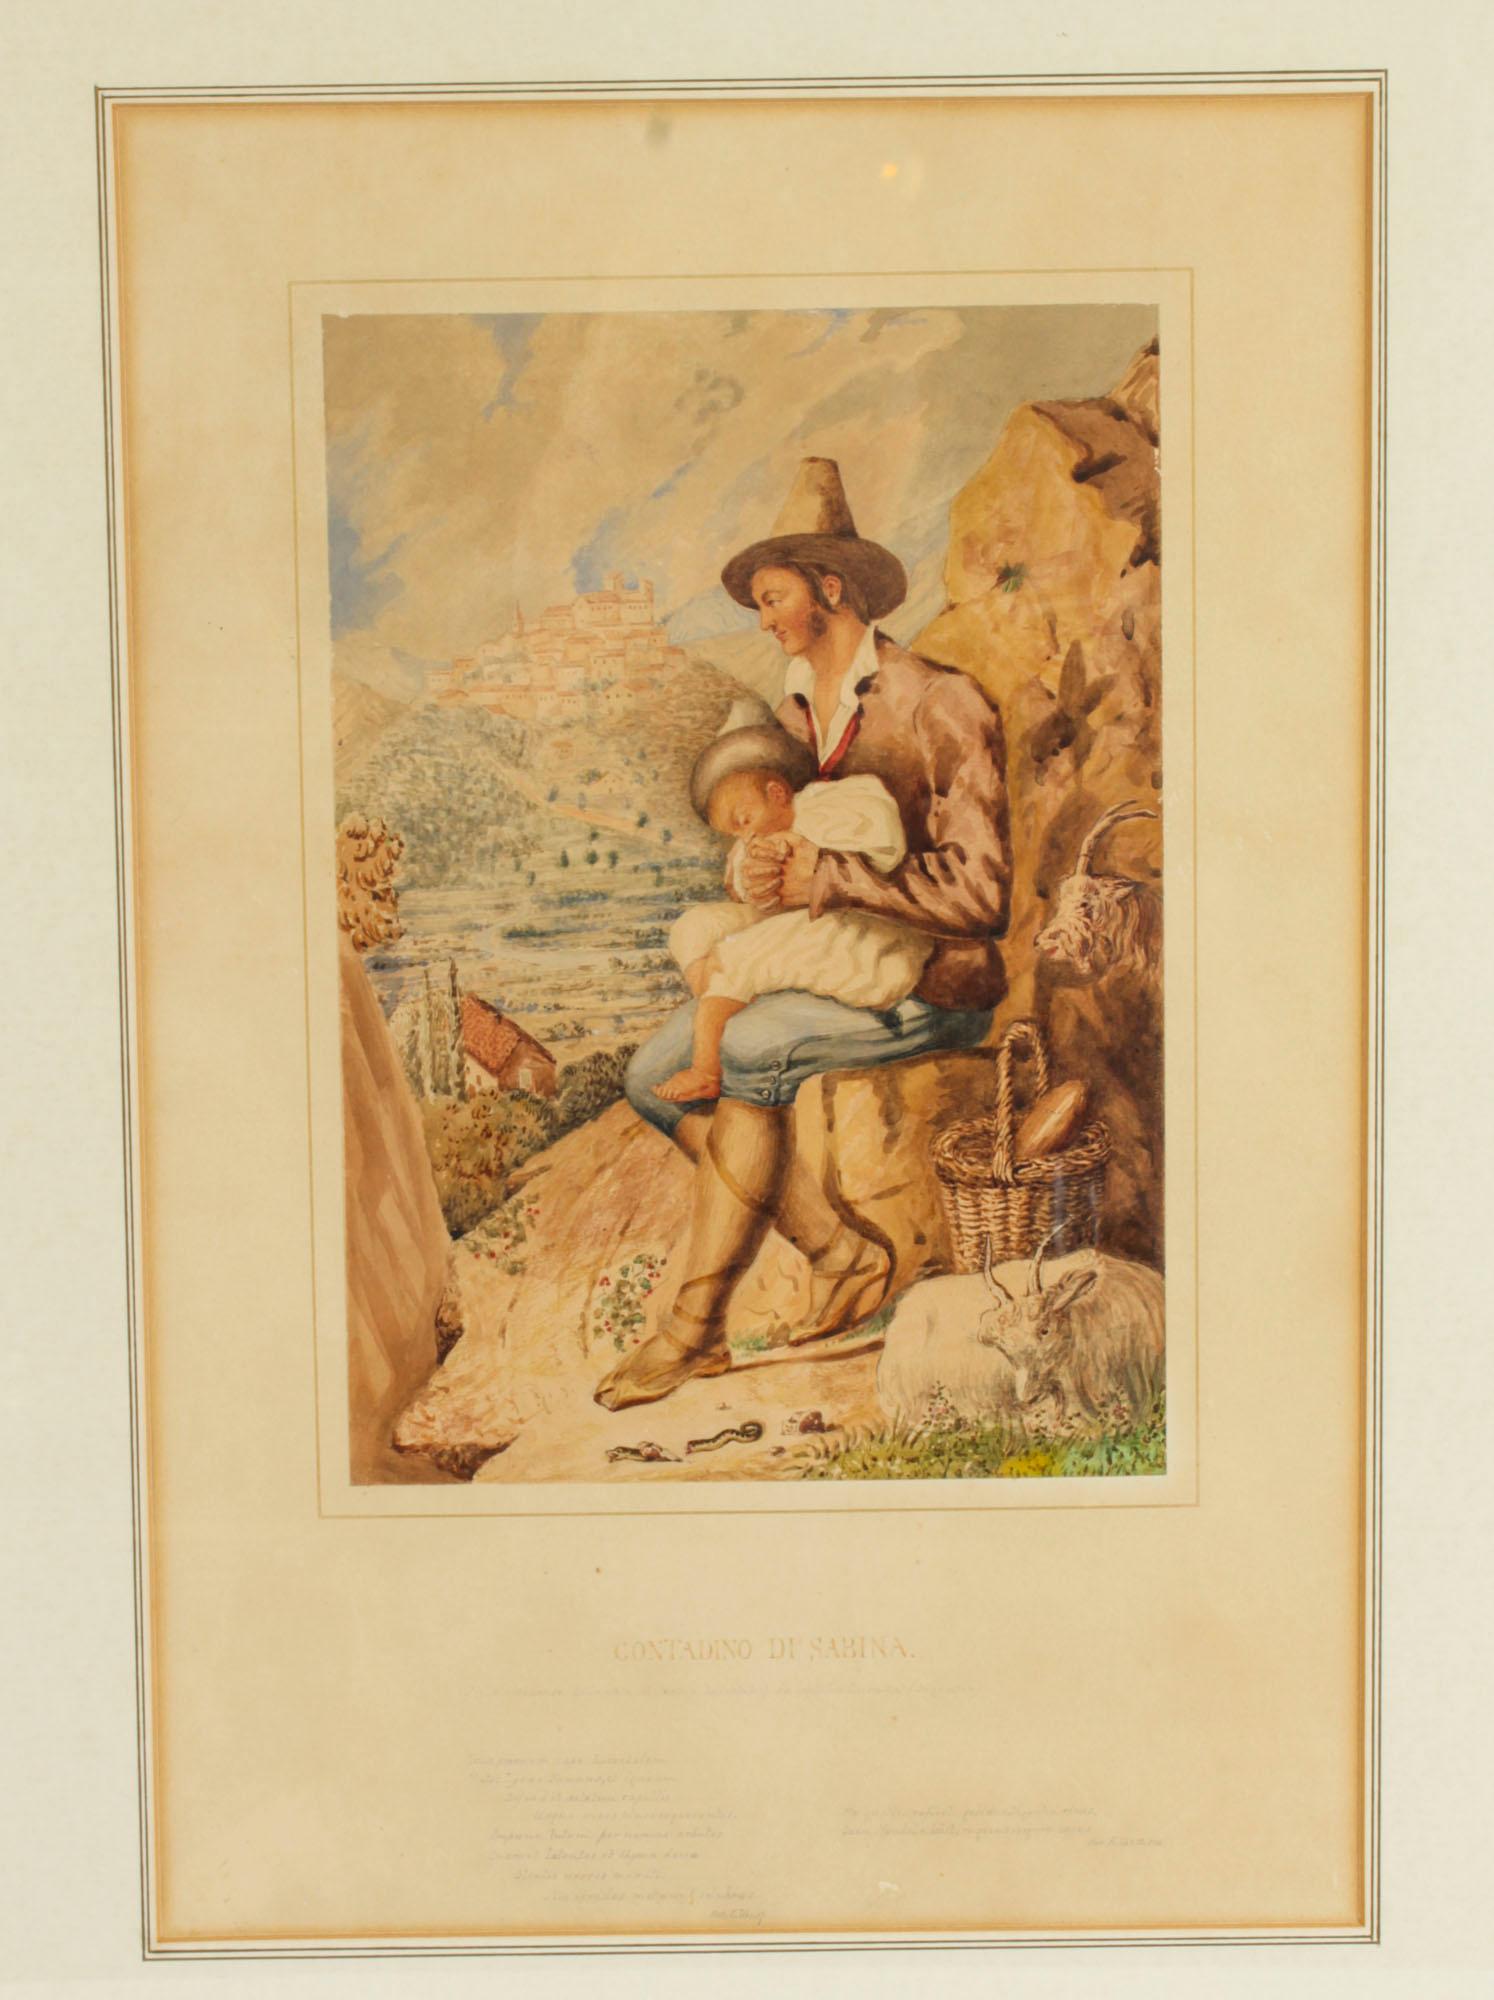 This is a beautiful and decorative antique Italian watercolour titled 